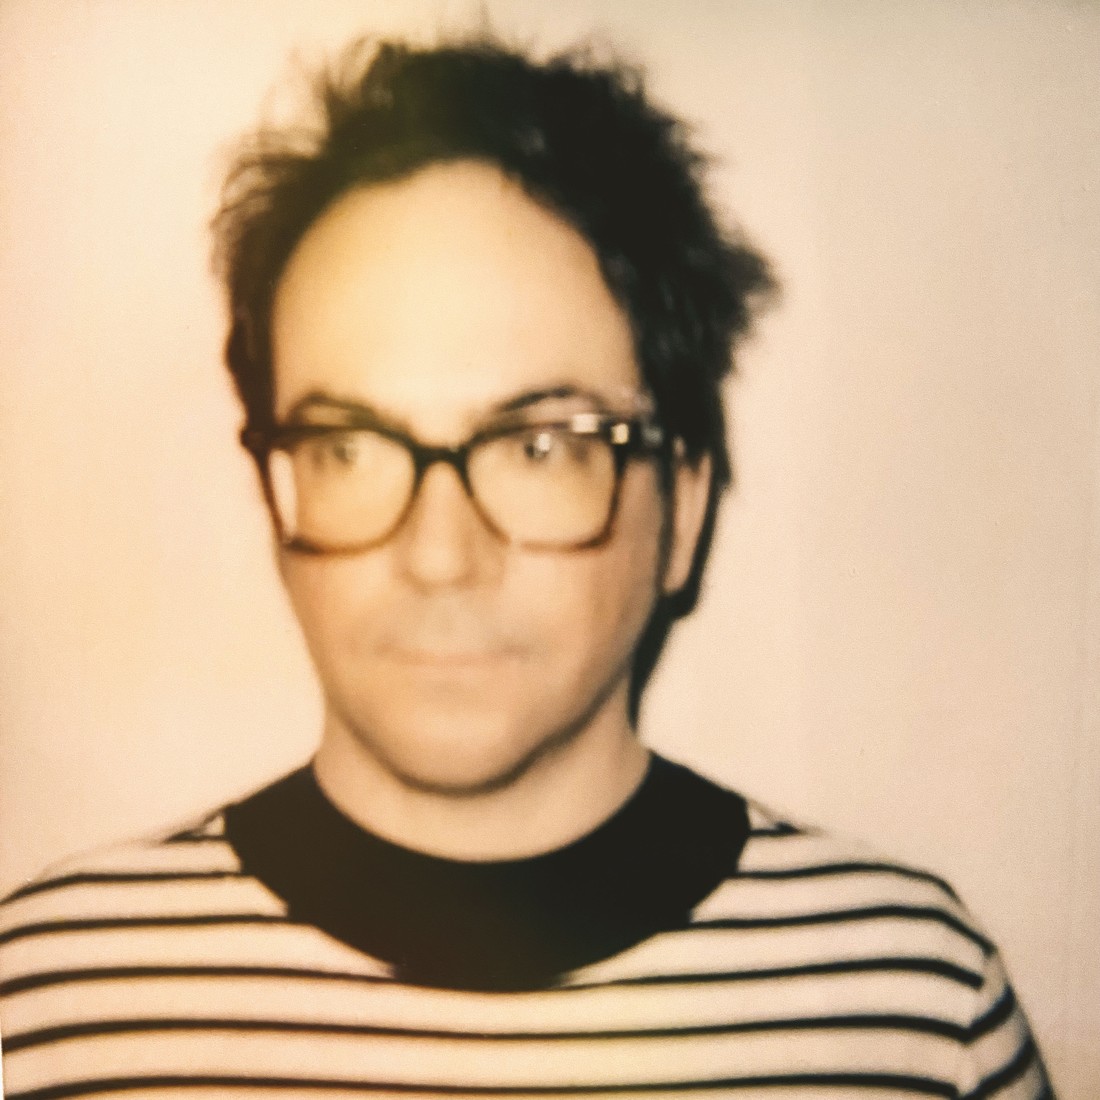 HEAR: Anthony Pirog – “Inflorescence” Ft. Andy Summers (The Police)